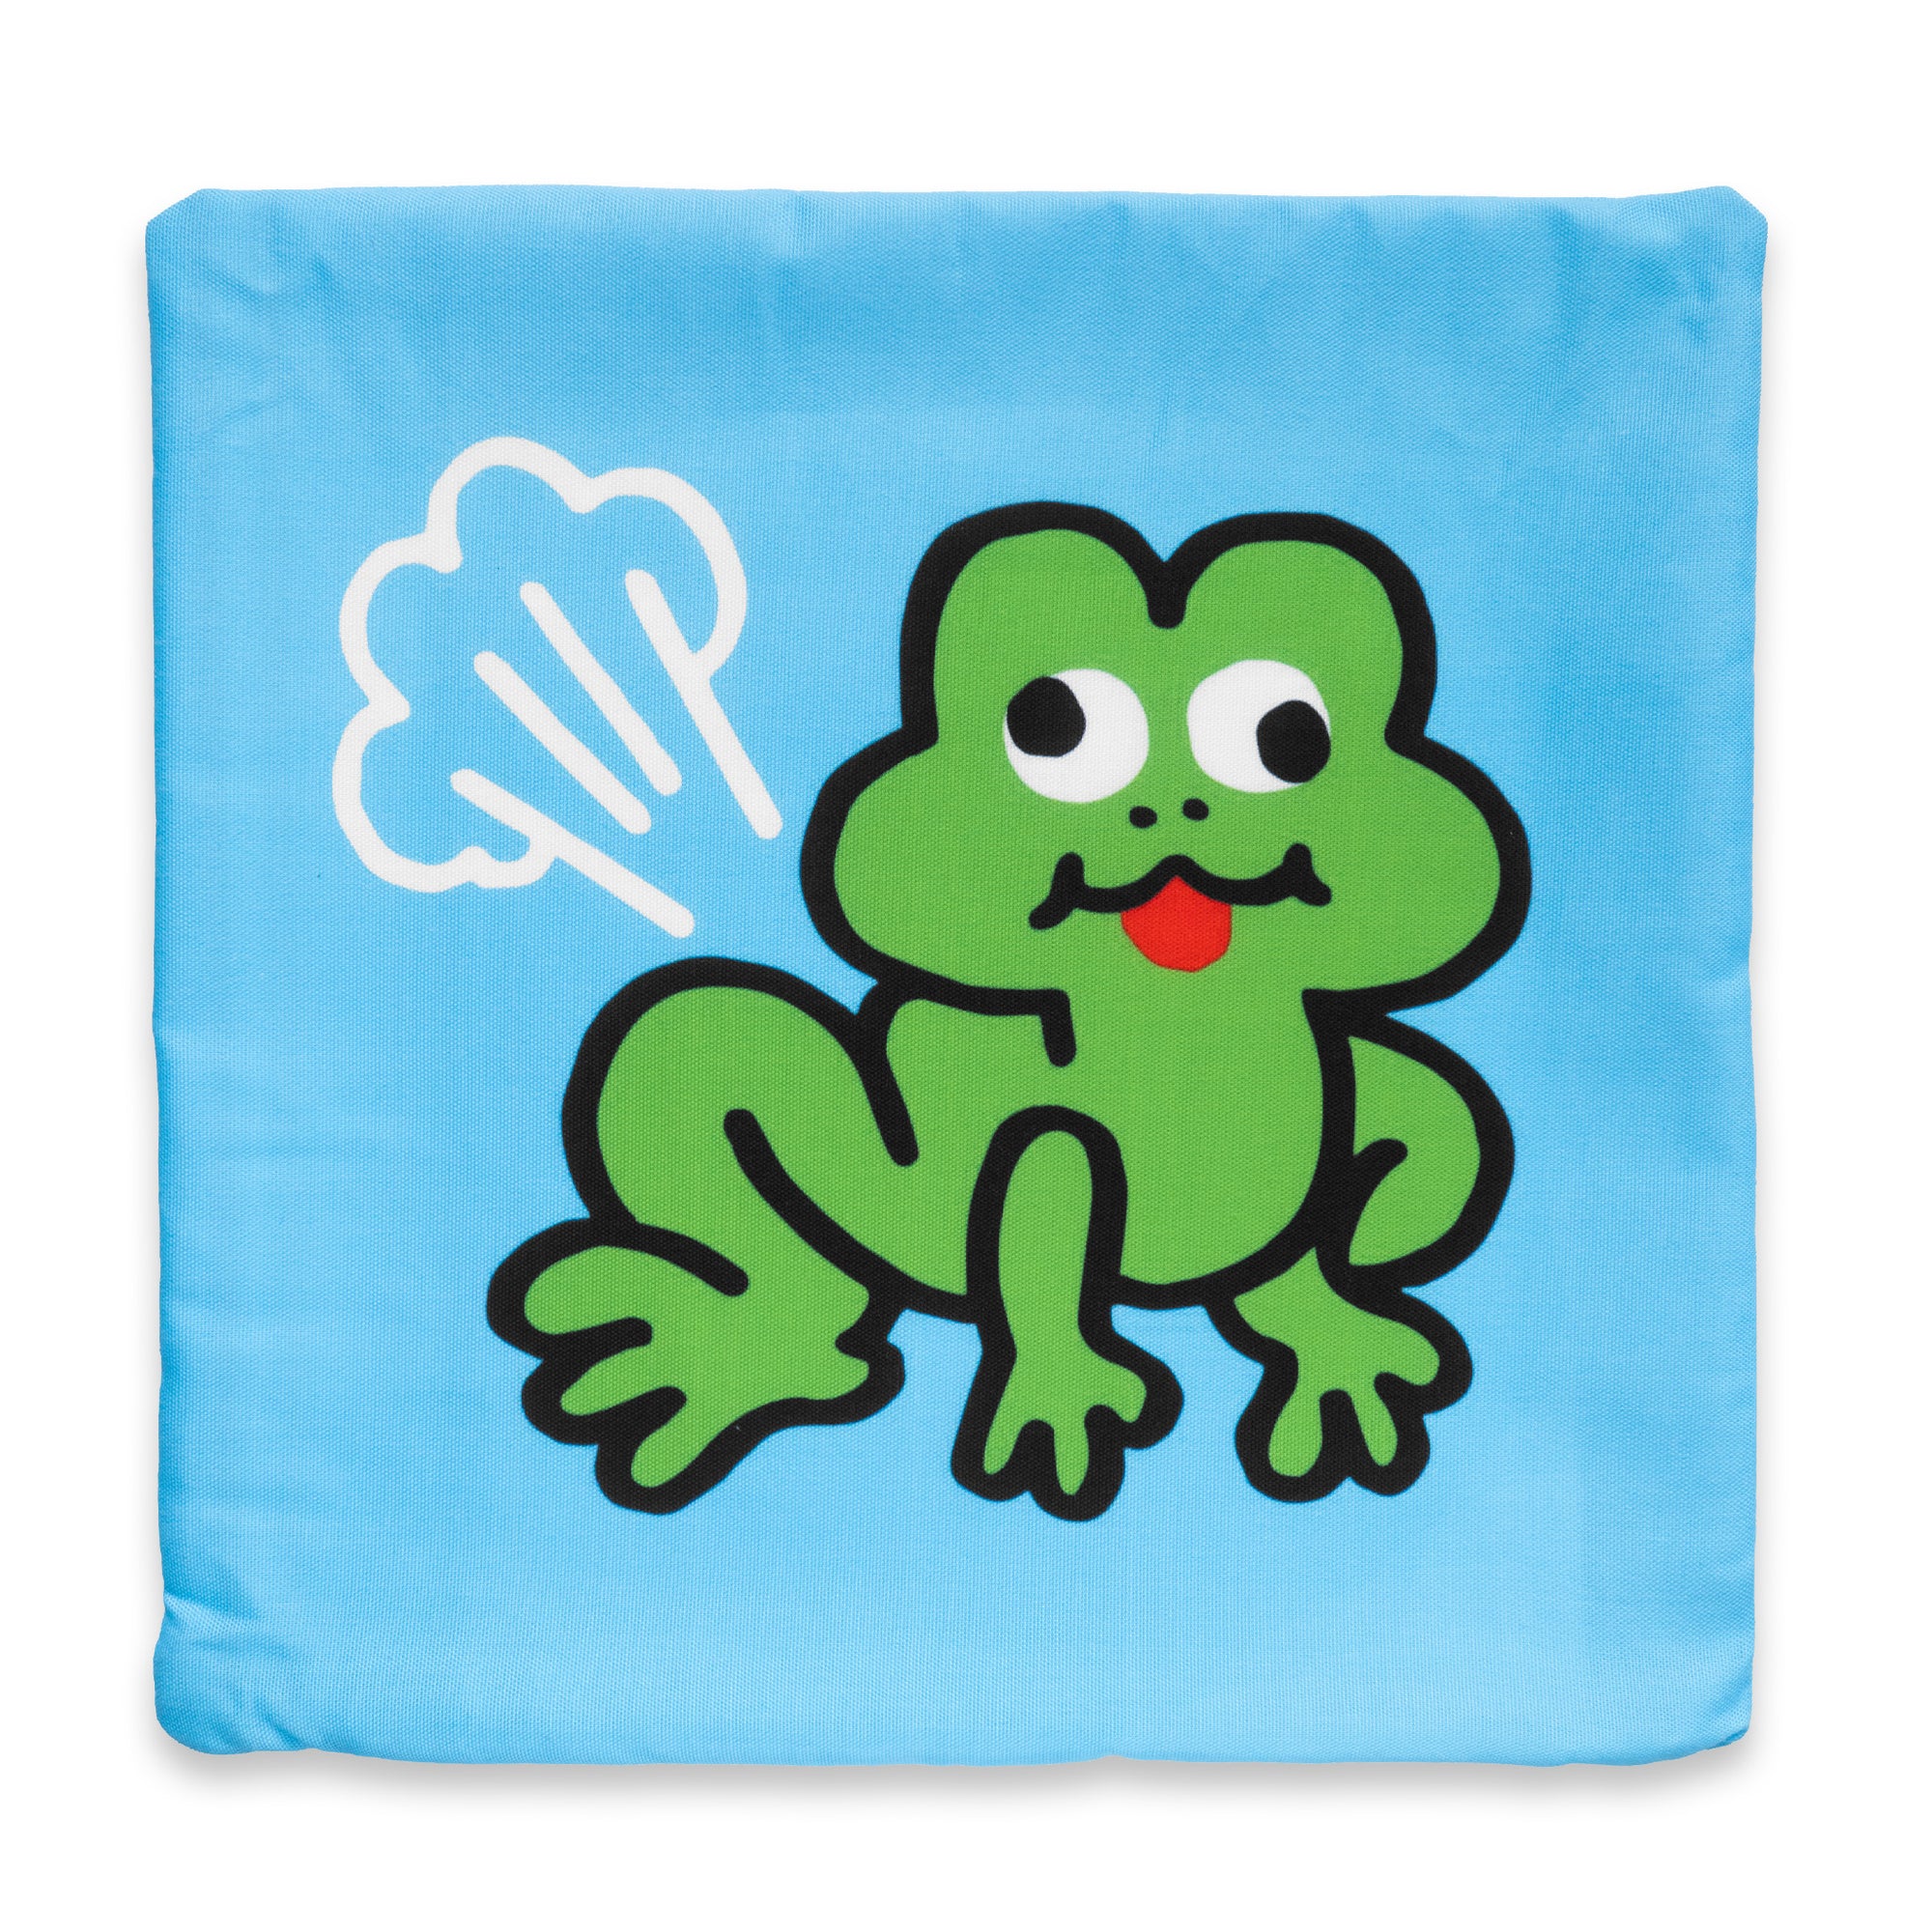 Frog Pillowcase by No Fun®. Pillowcase is blue, with a green cartoon frog. The frog has a fart cloud coming out of its butt. The frogs has a silly expression on its face and its tongue is out.